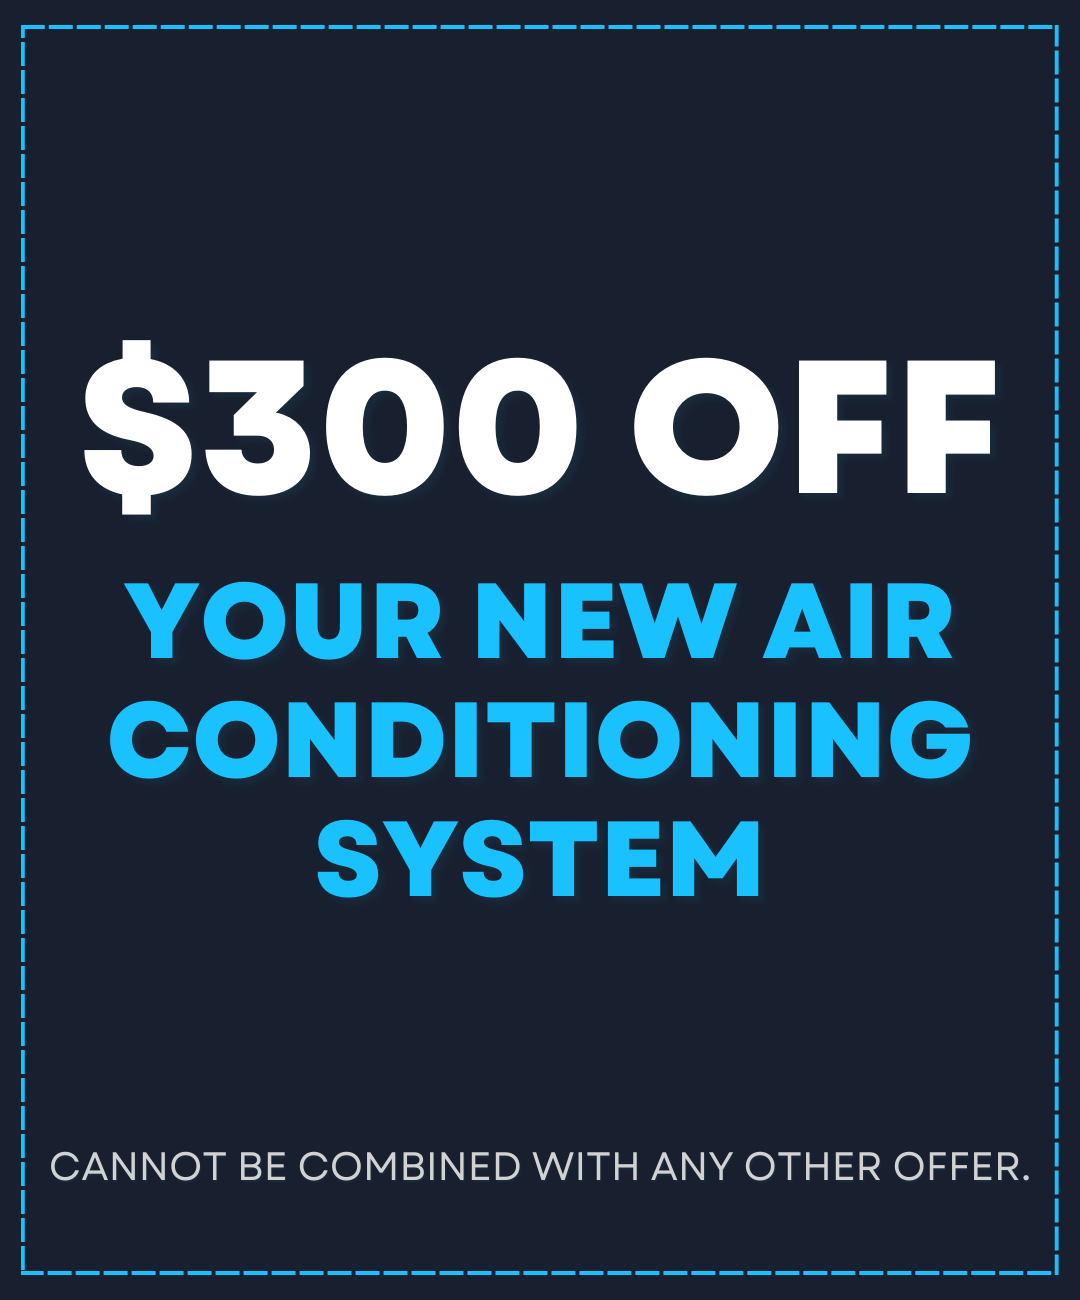 $300 off your new air conditioning system coupon